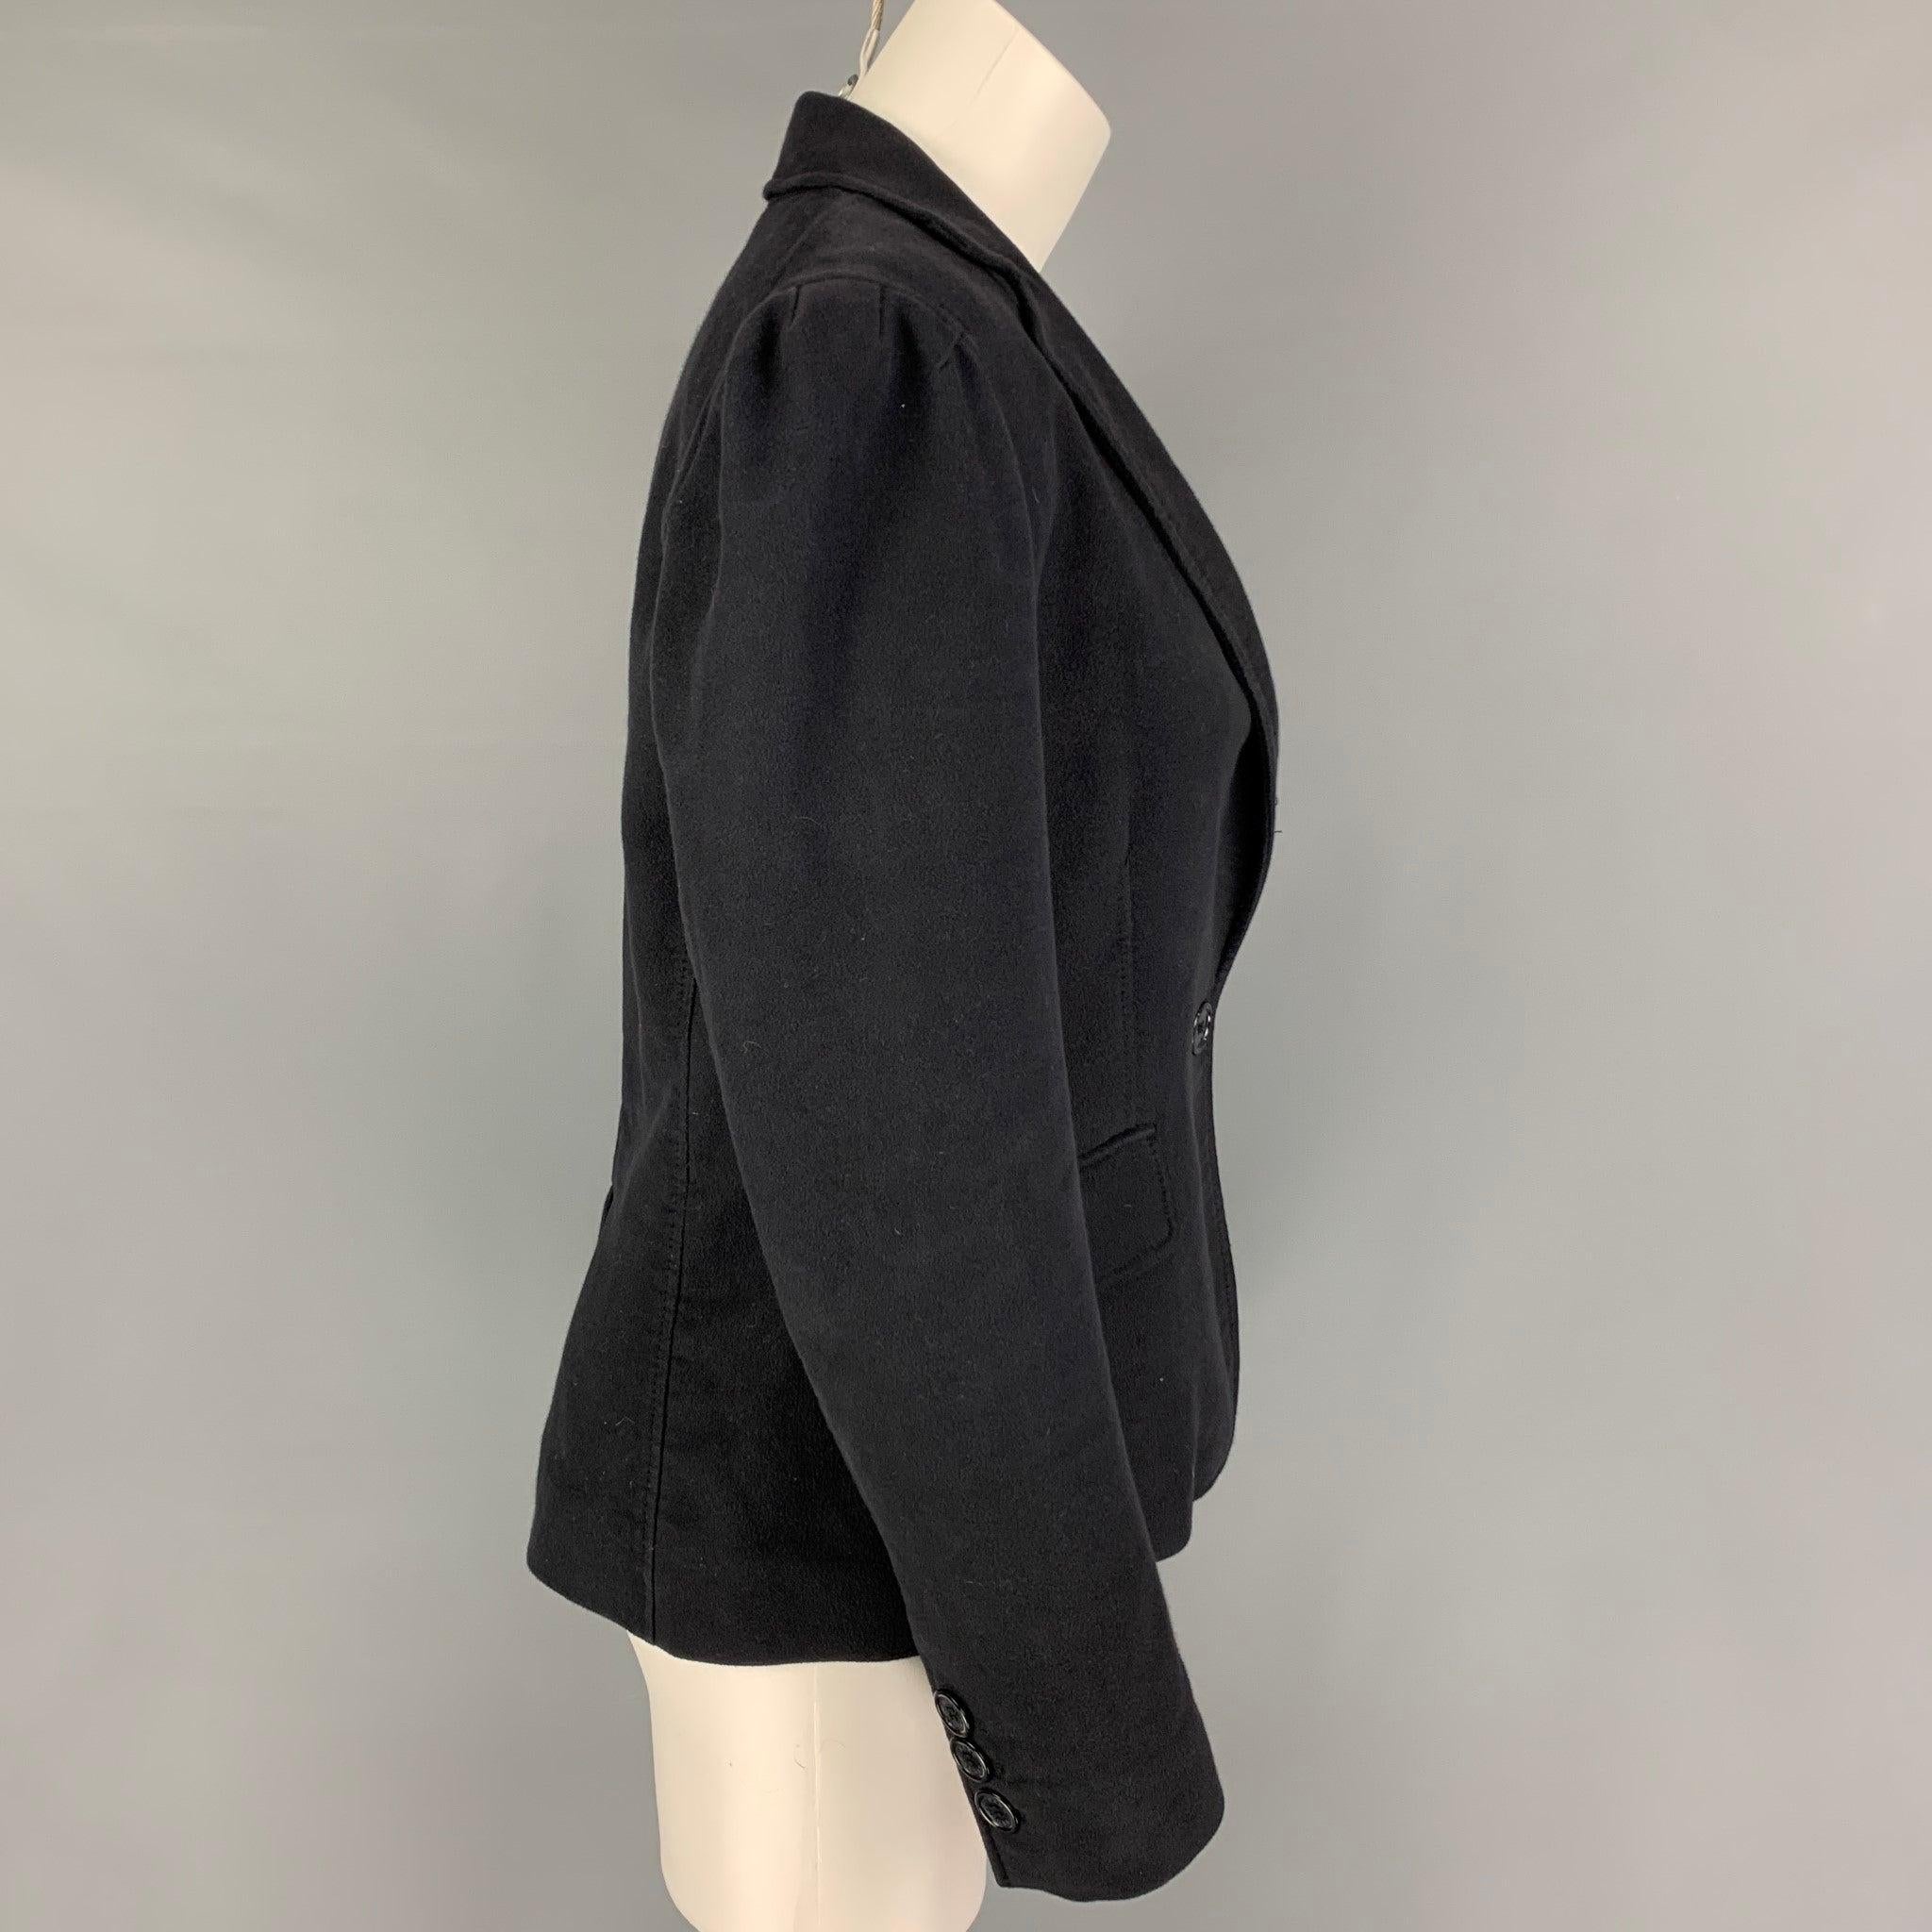 MARC by MARC JACOBS blazer comes in a charcoal cotton featuring a notch lapel, flap pockets, single back vent, and a single button closure.
Good
Pre-Owned Condition. 

Marked:   8 

Measurements: 
 
Shoulder: 16 inches Bust: 34 inches Sleeve: 24